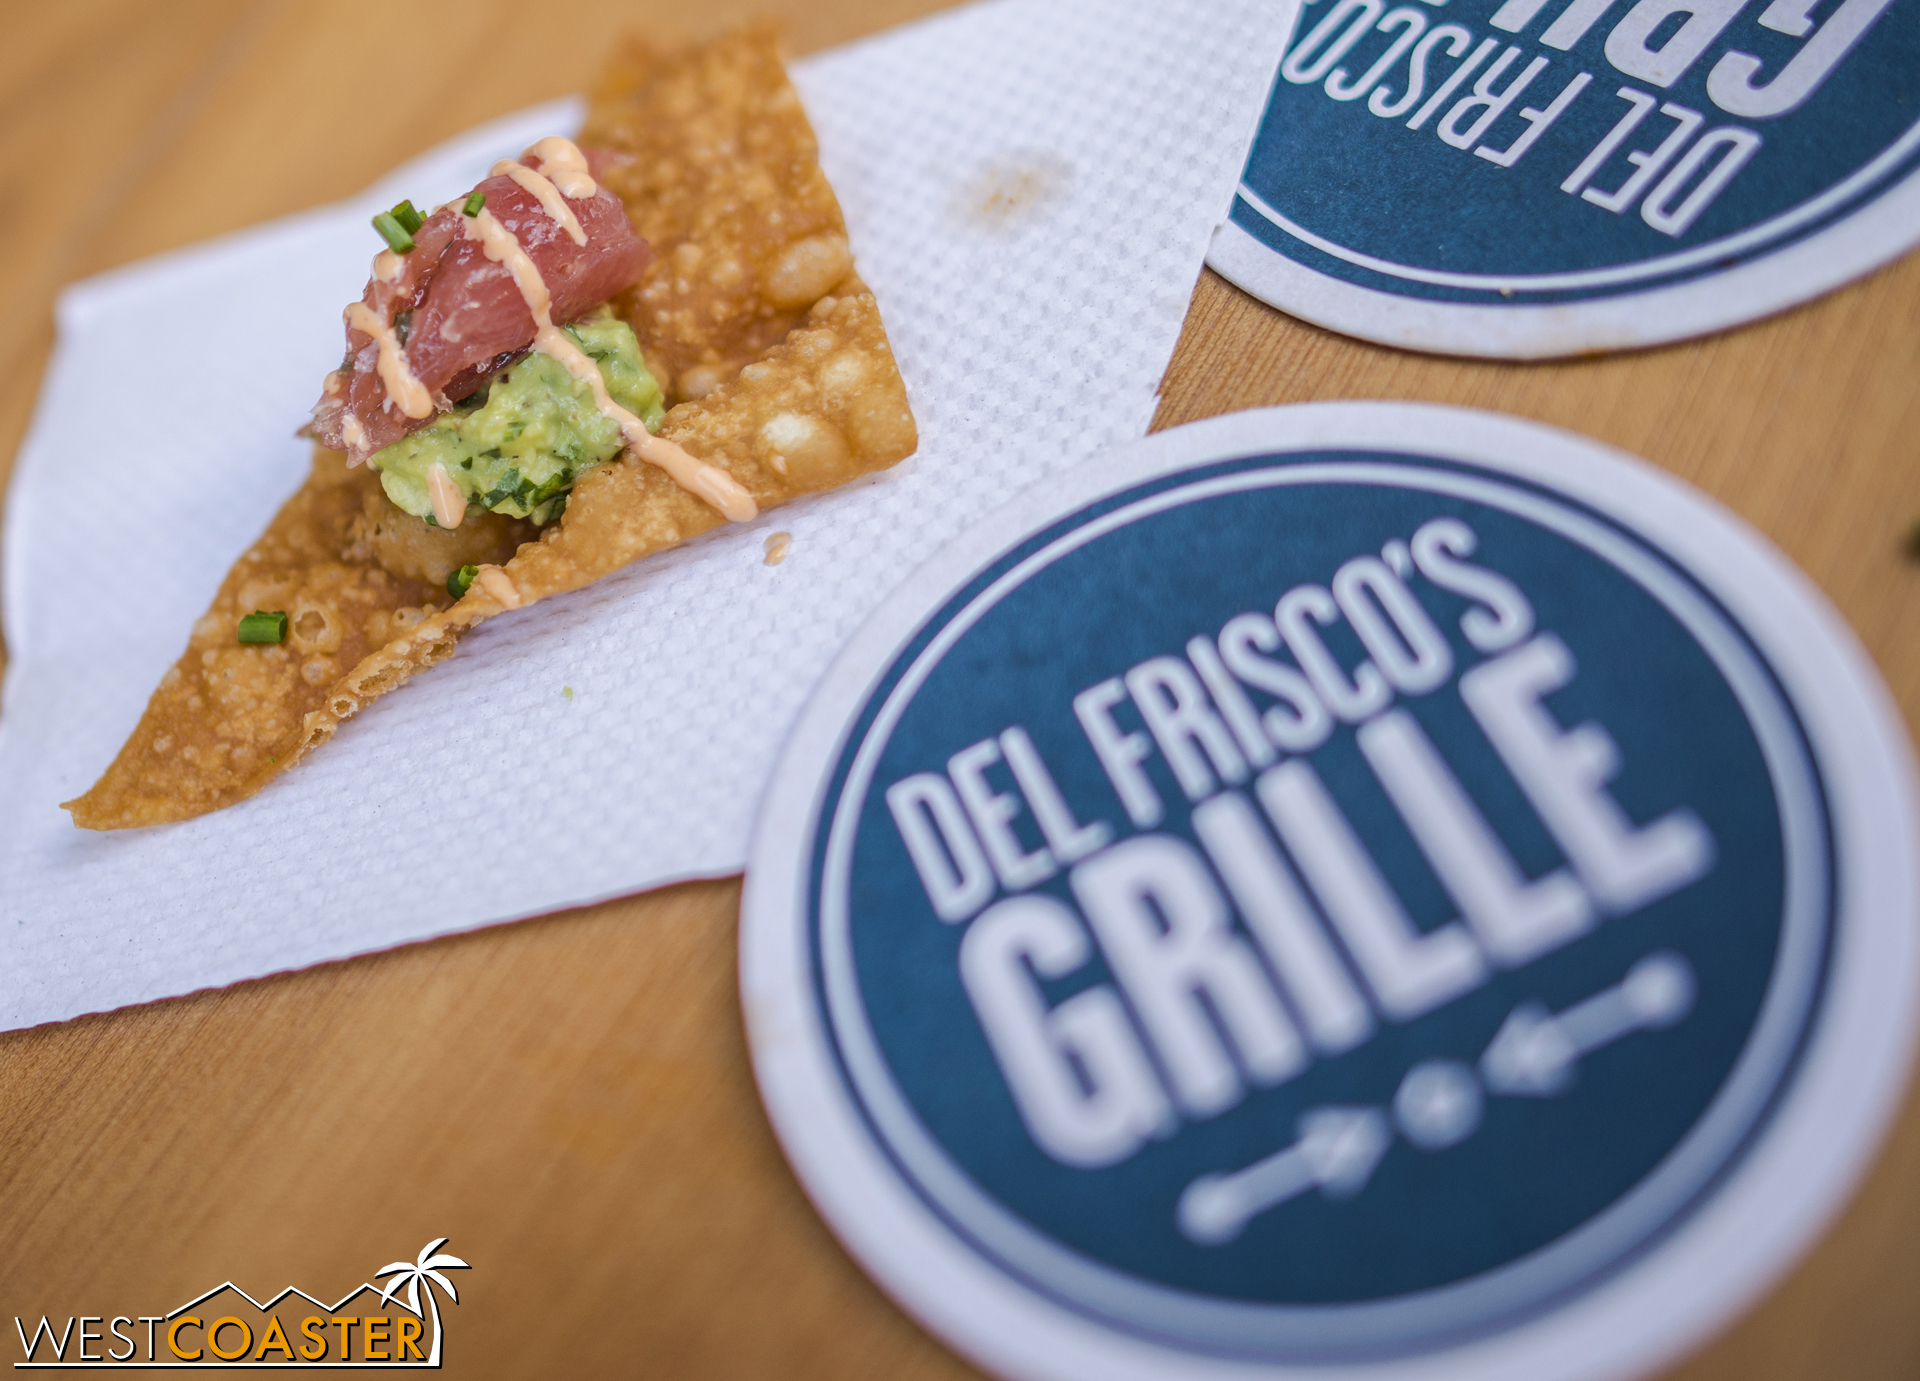  Local restaurant Del Frisco's Grille had "ahi tacos" (more like ahi tuna with fresh guacamole and a cilantro lime sauce over a sweet tortilla chip) samples.&nbsp; They were delicious! 